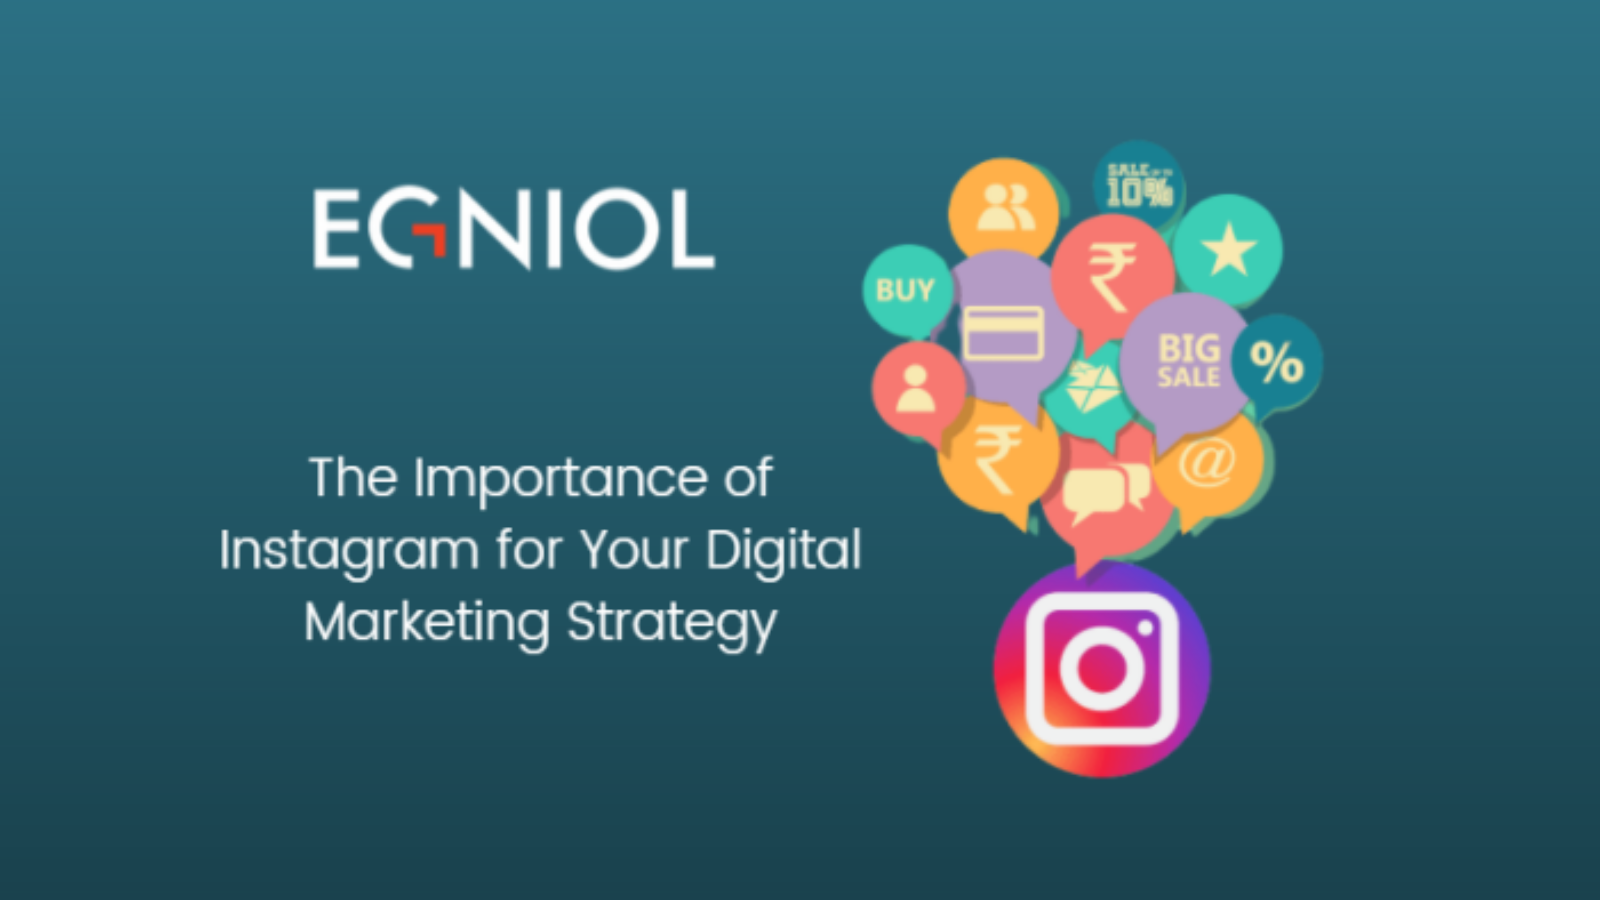 The Importance of Instagram for Your Digital Marketing Strategy - By Egniol